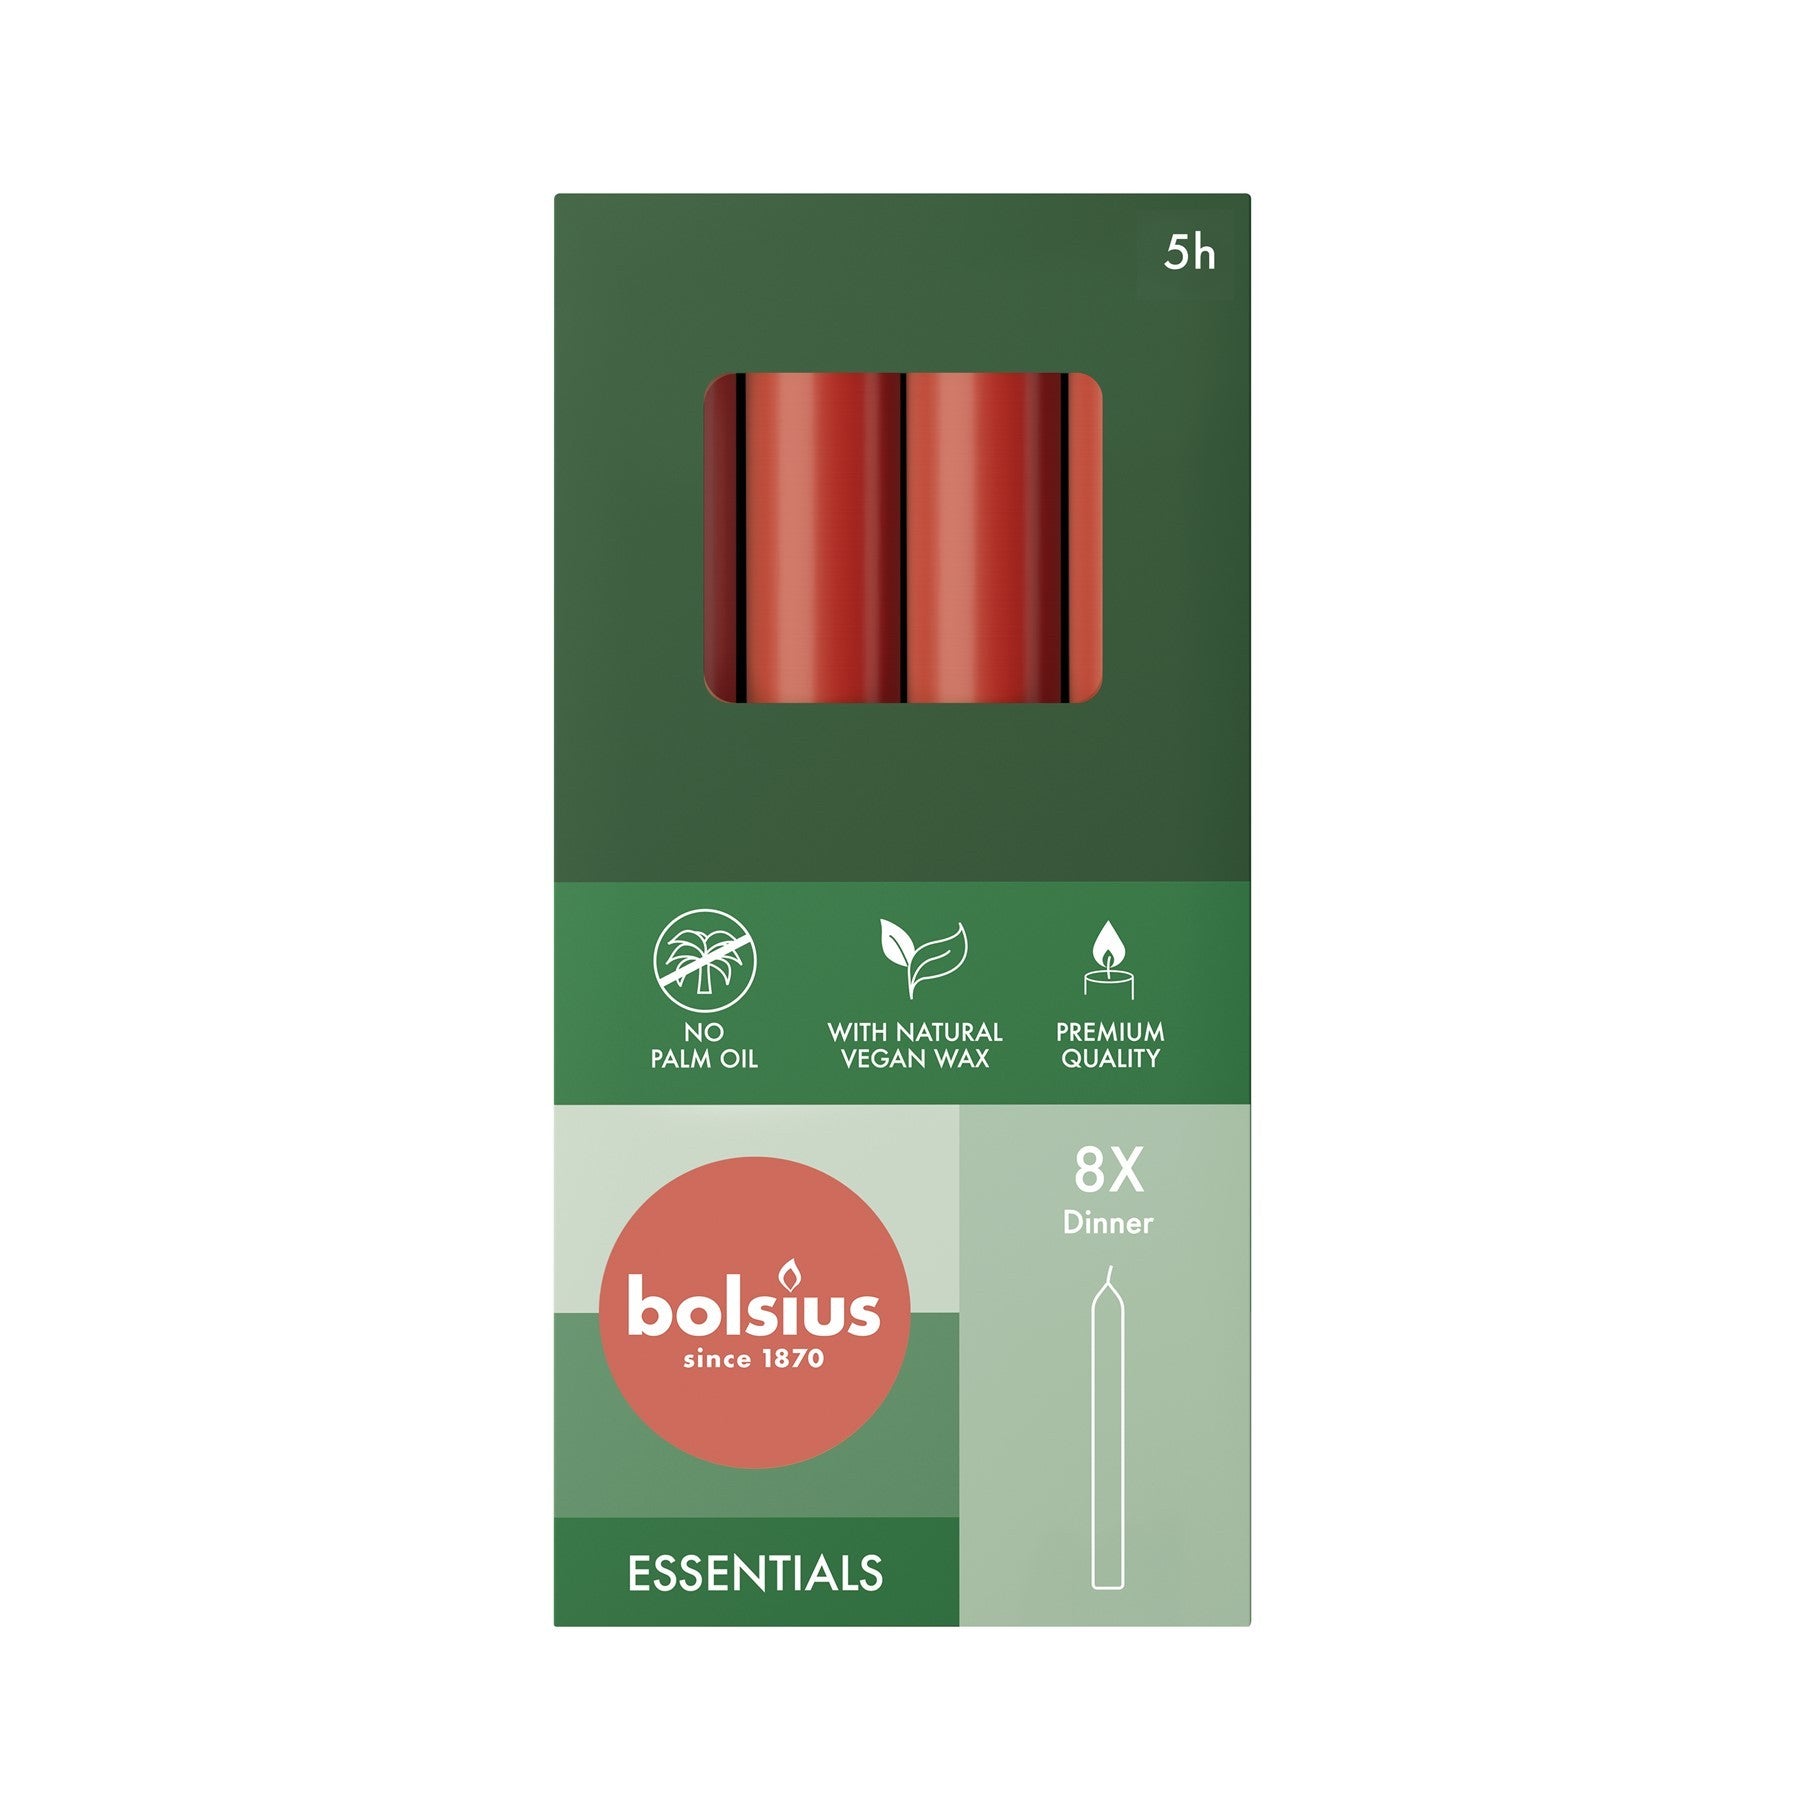 View Bolsius Delicate Red Box of 8 Dinner Candles 170mm x 20mm information